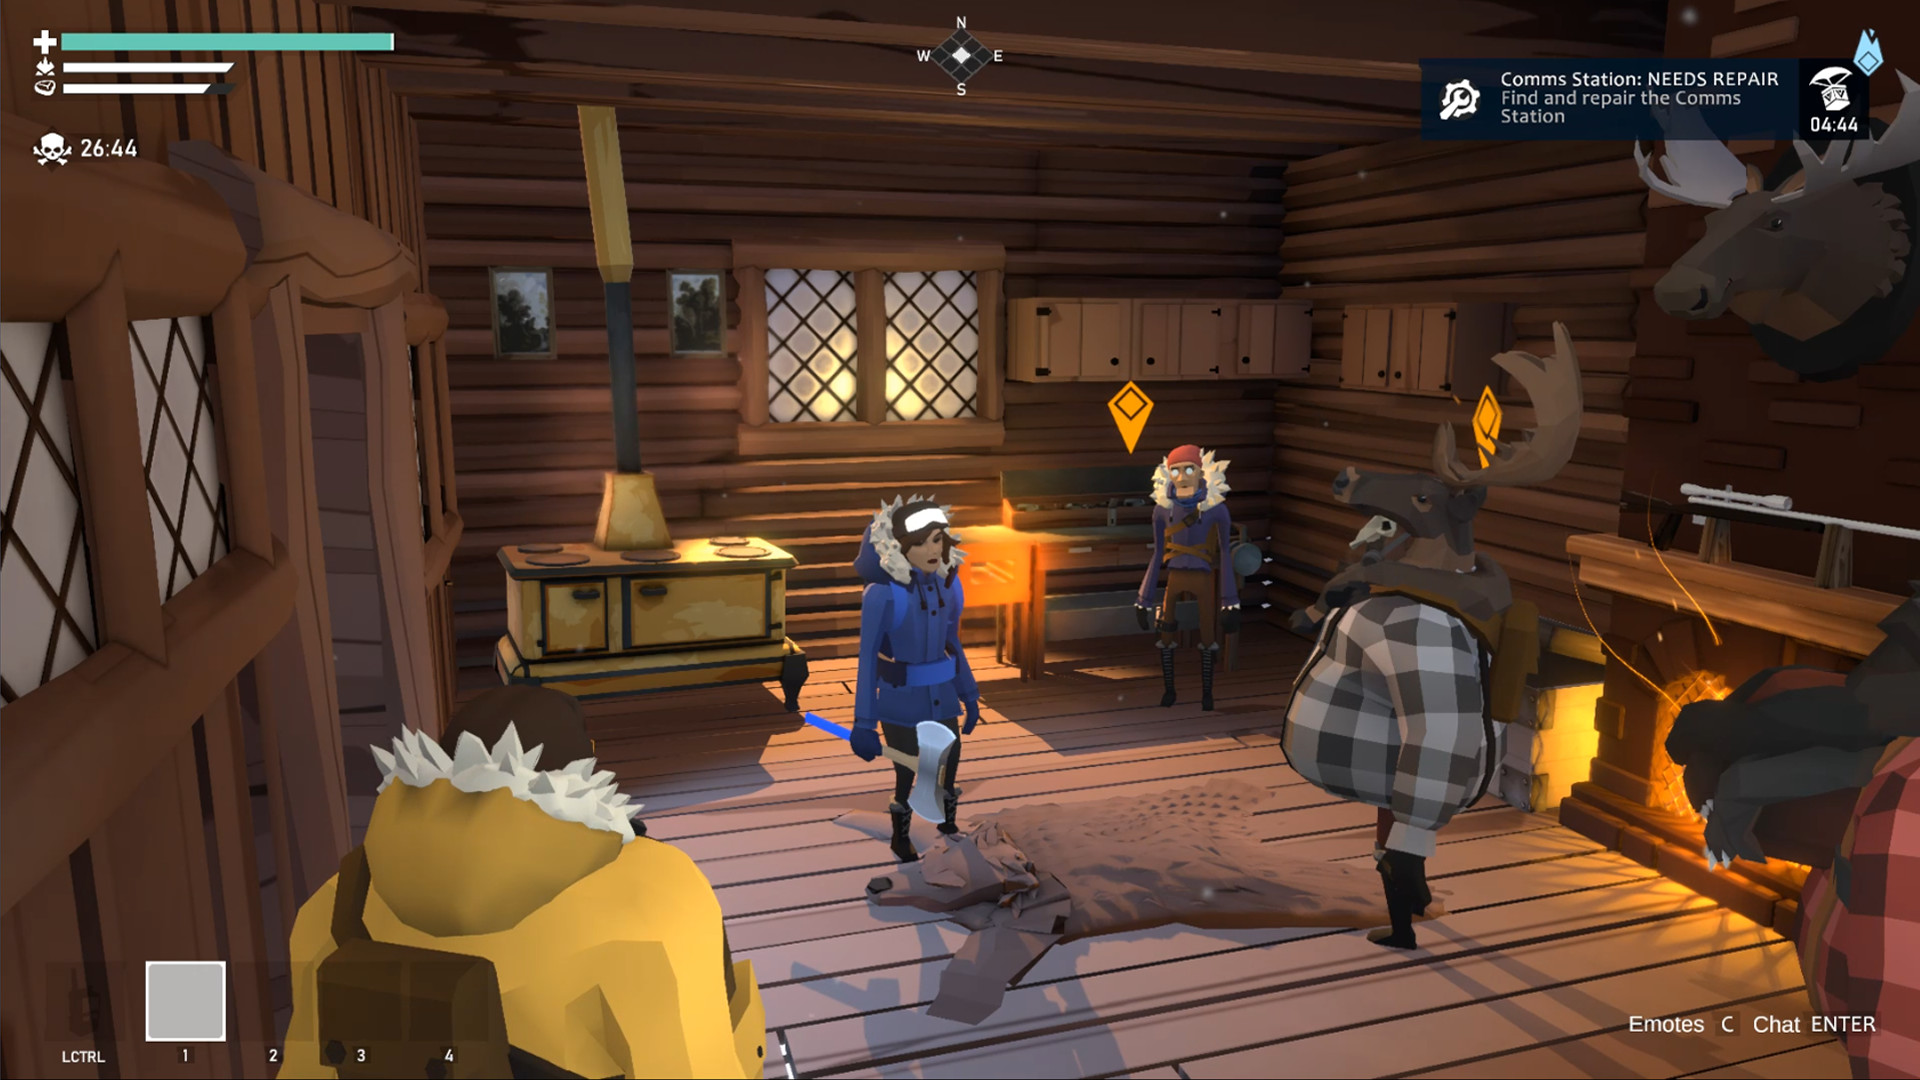 Games like Among Us, a tense meeting in a cabin in Project Winter